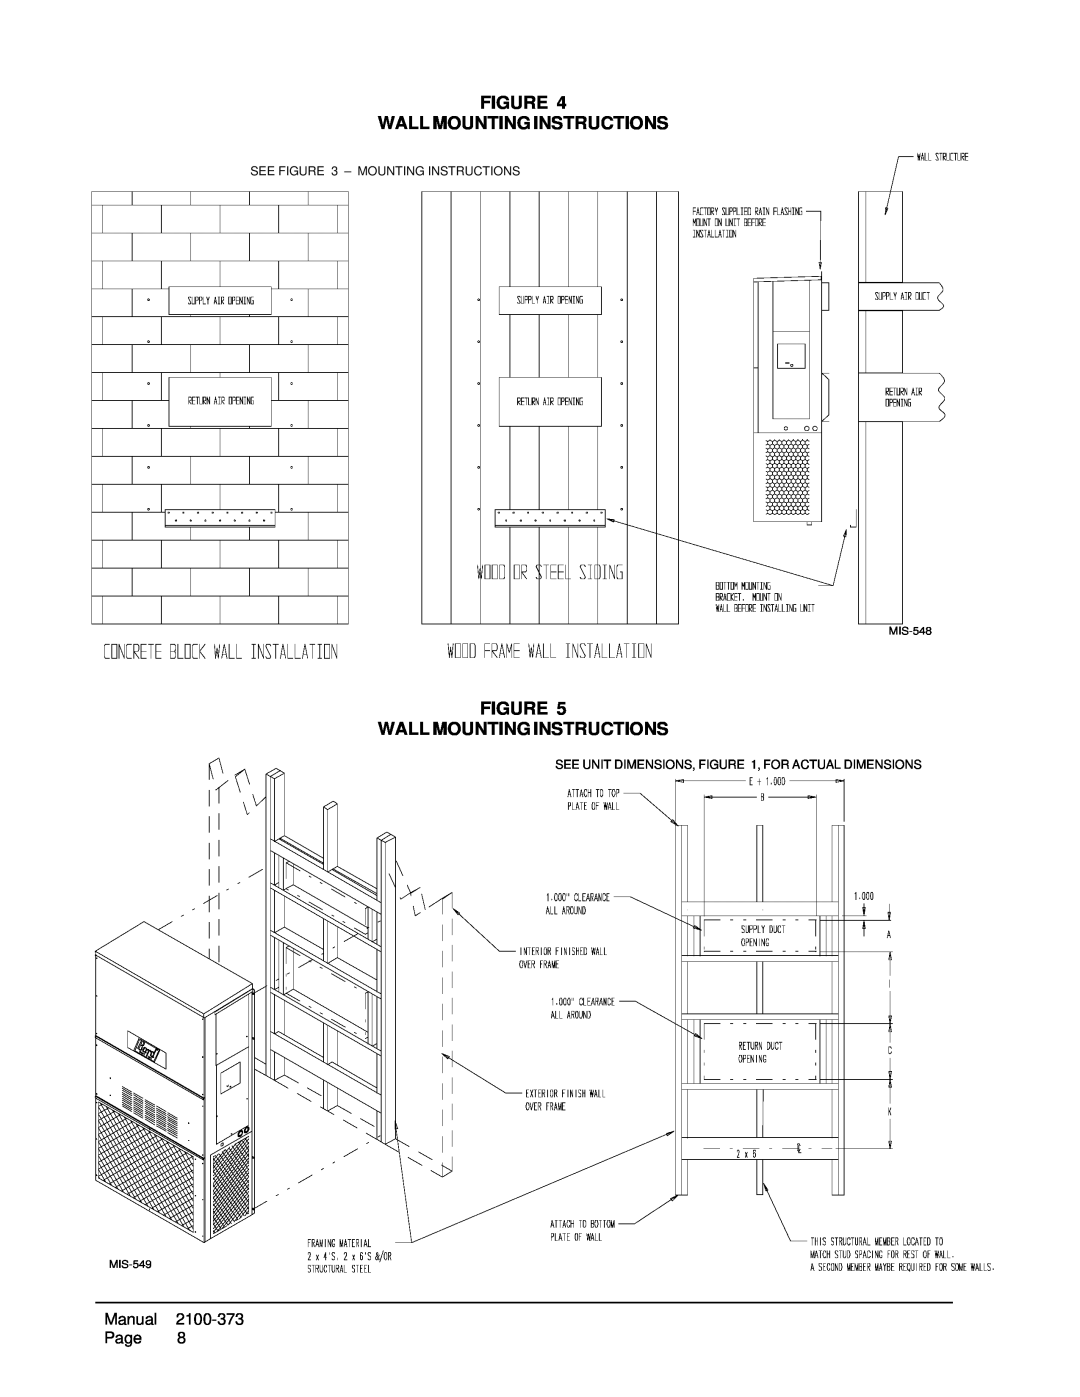 Bard WH242, WH183 installation instructions Figure Wall Mounting Instructions, See - Mounting Instructions, MIS-548, MIS-549 